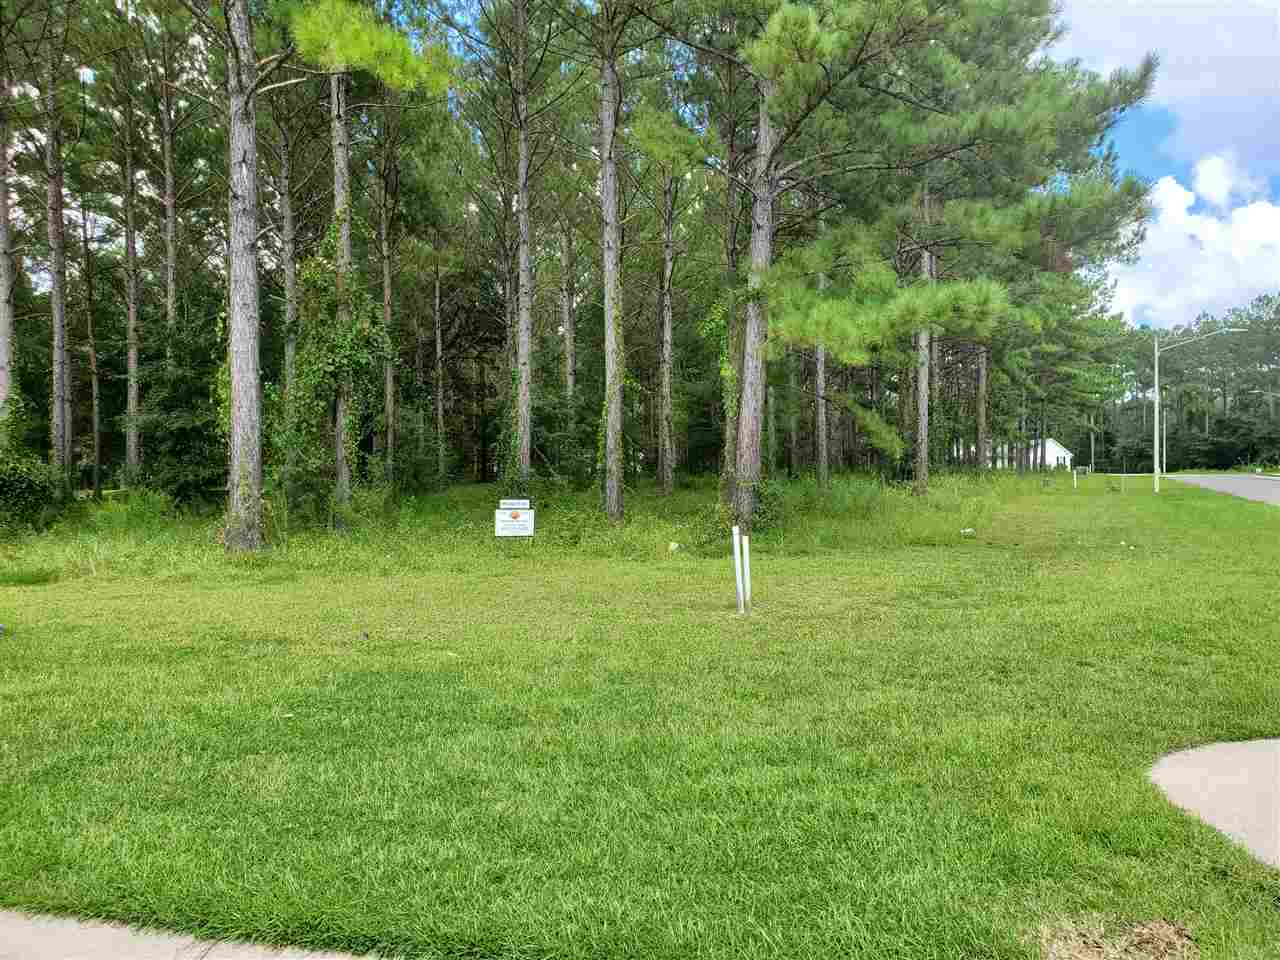 Lot 1 Crooked Creek,MONTICELLO,Florida 32344,Lots and land,Crooked Creek,368421